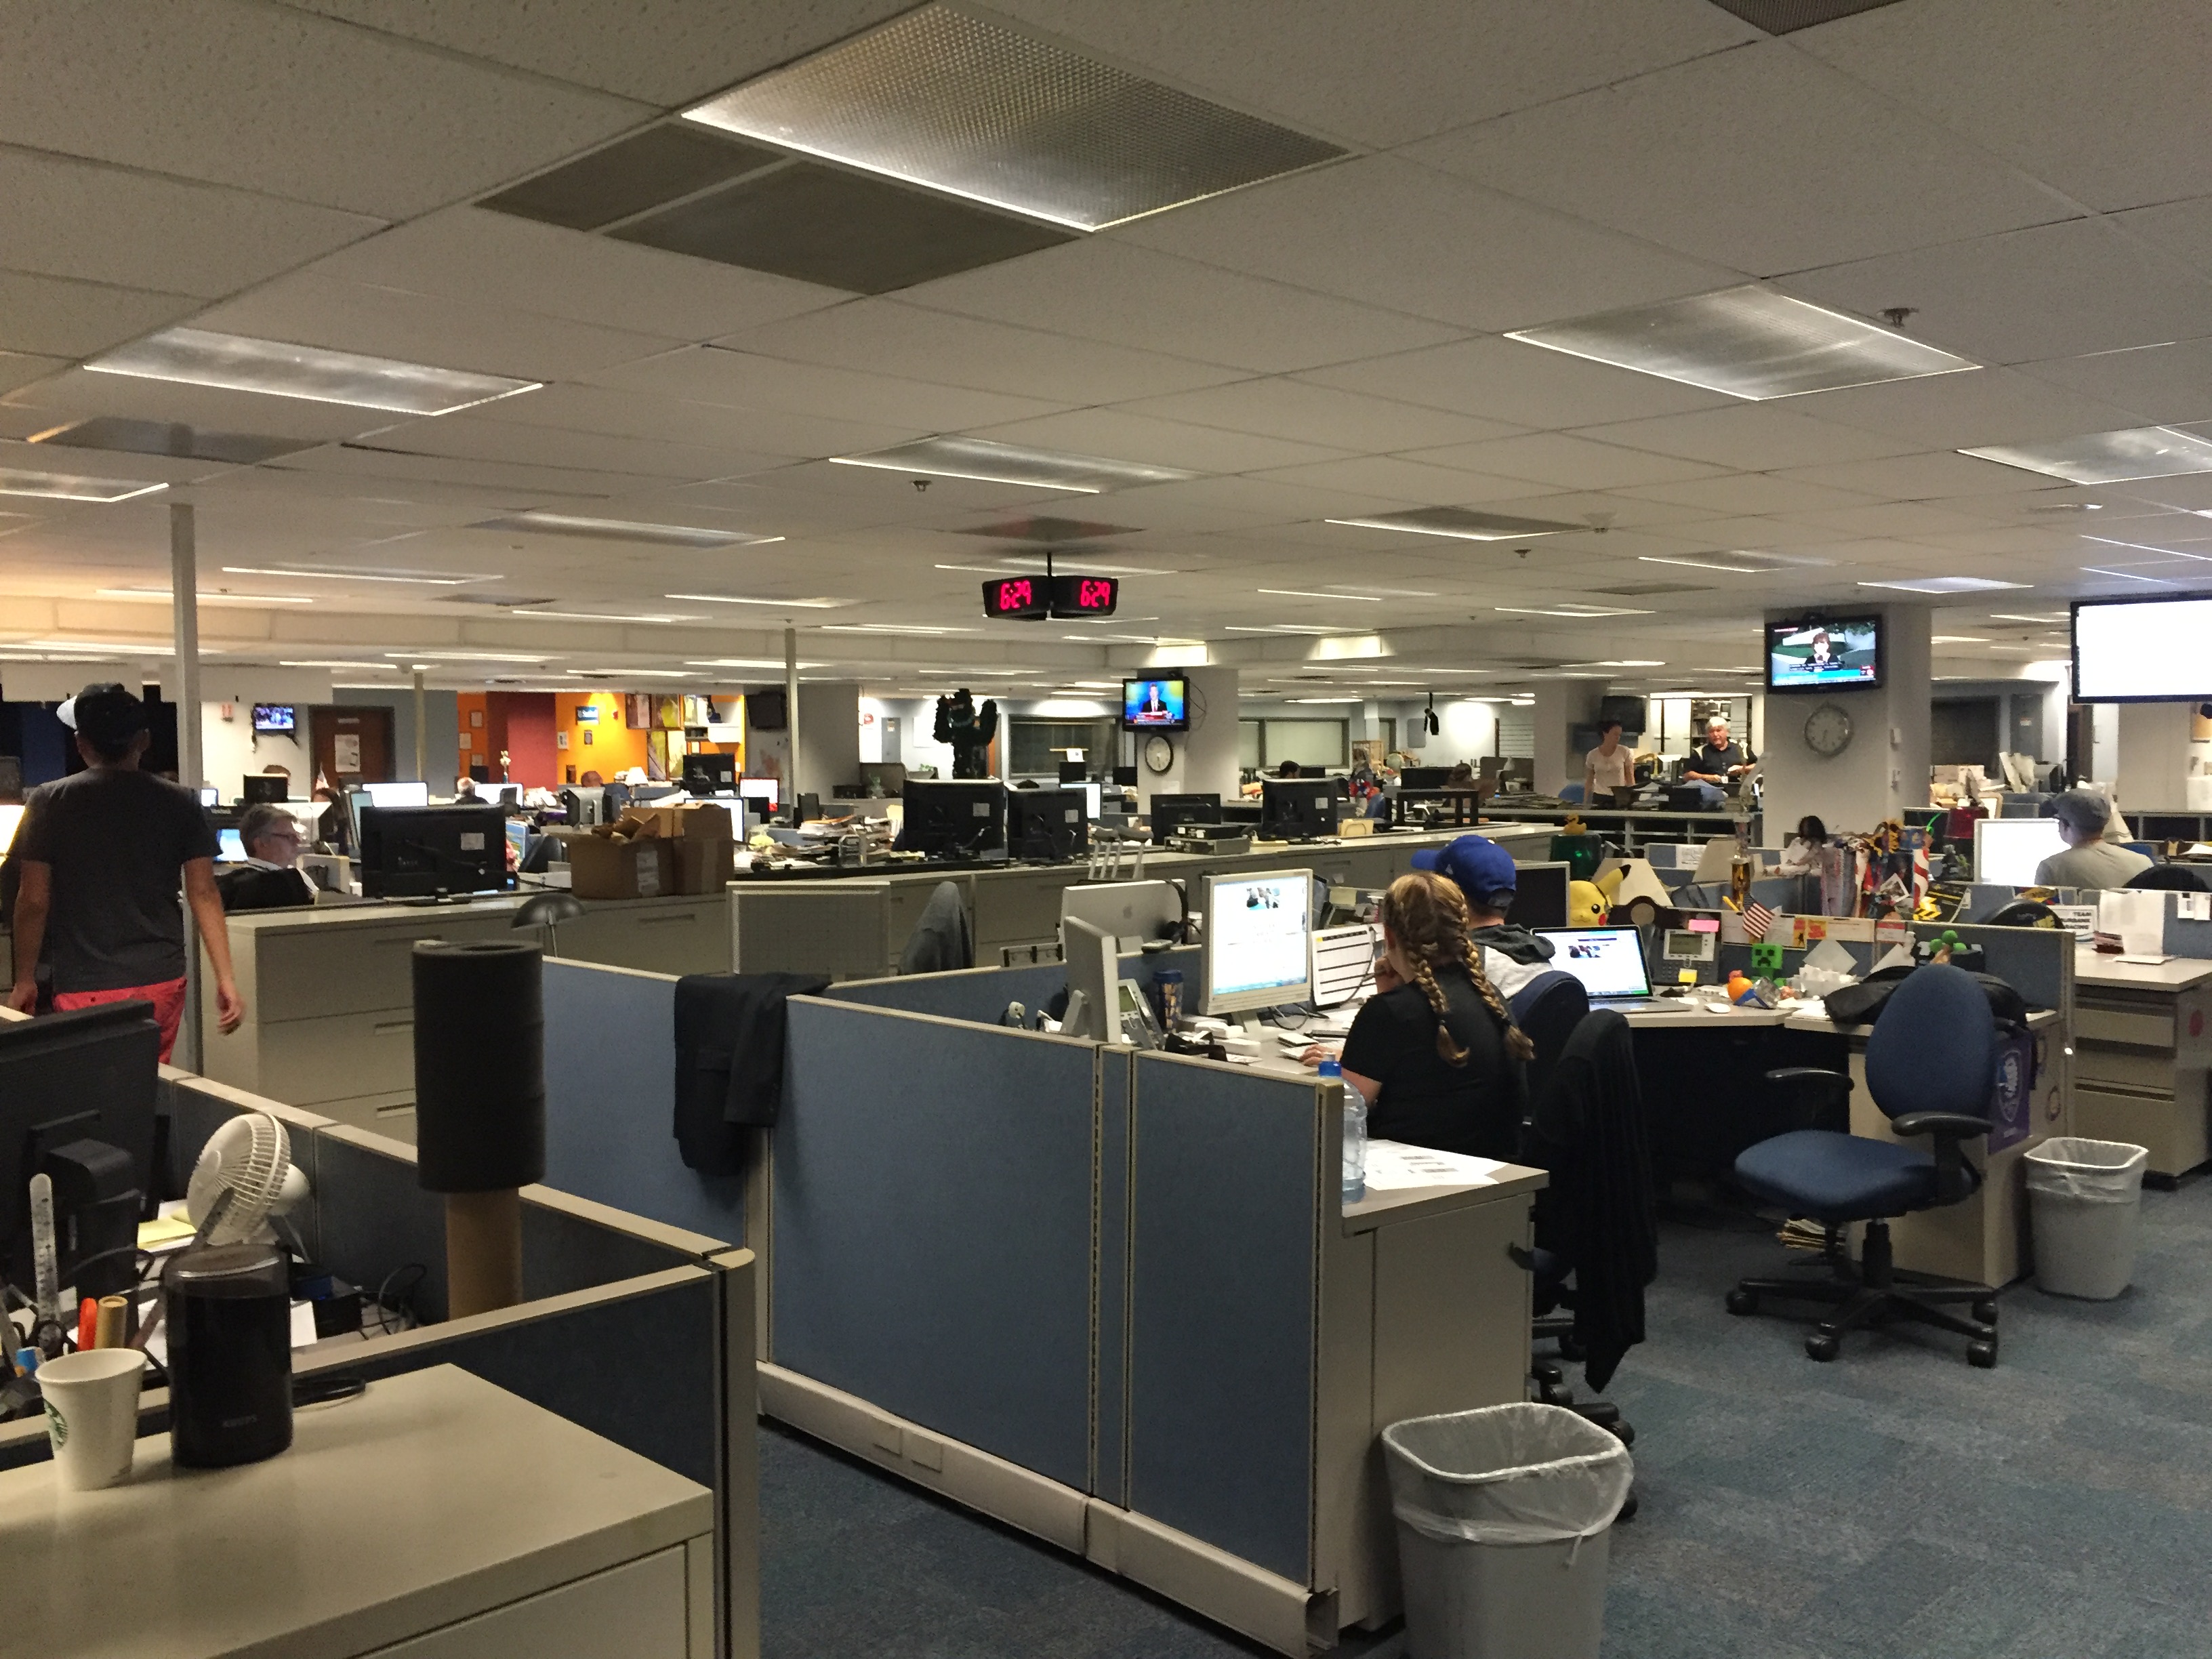 How The Orlando Sentinel With A Third Of The Staff It Once Had